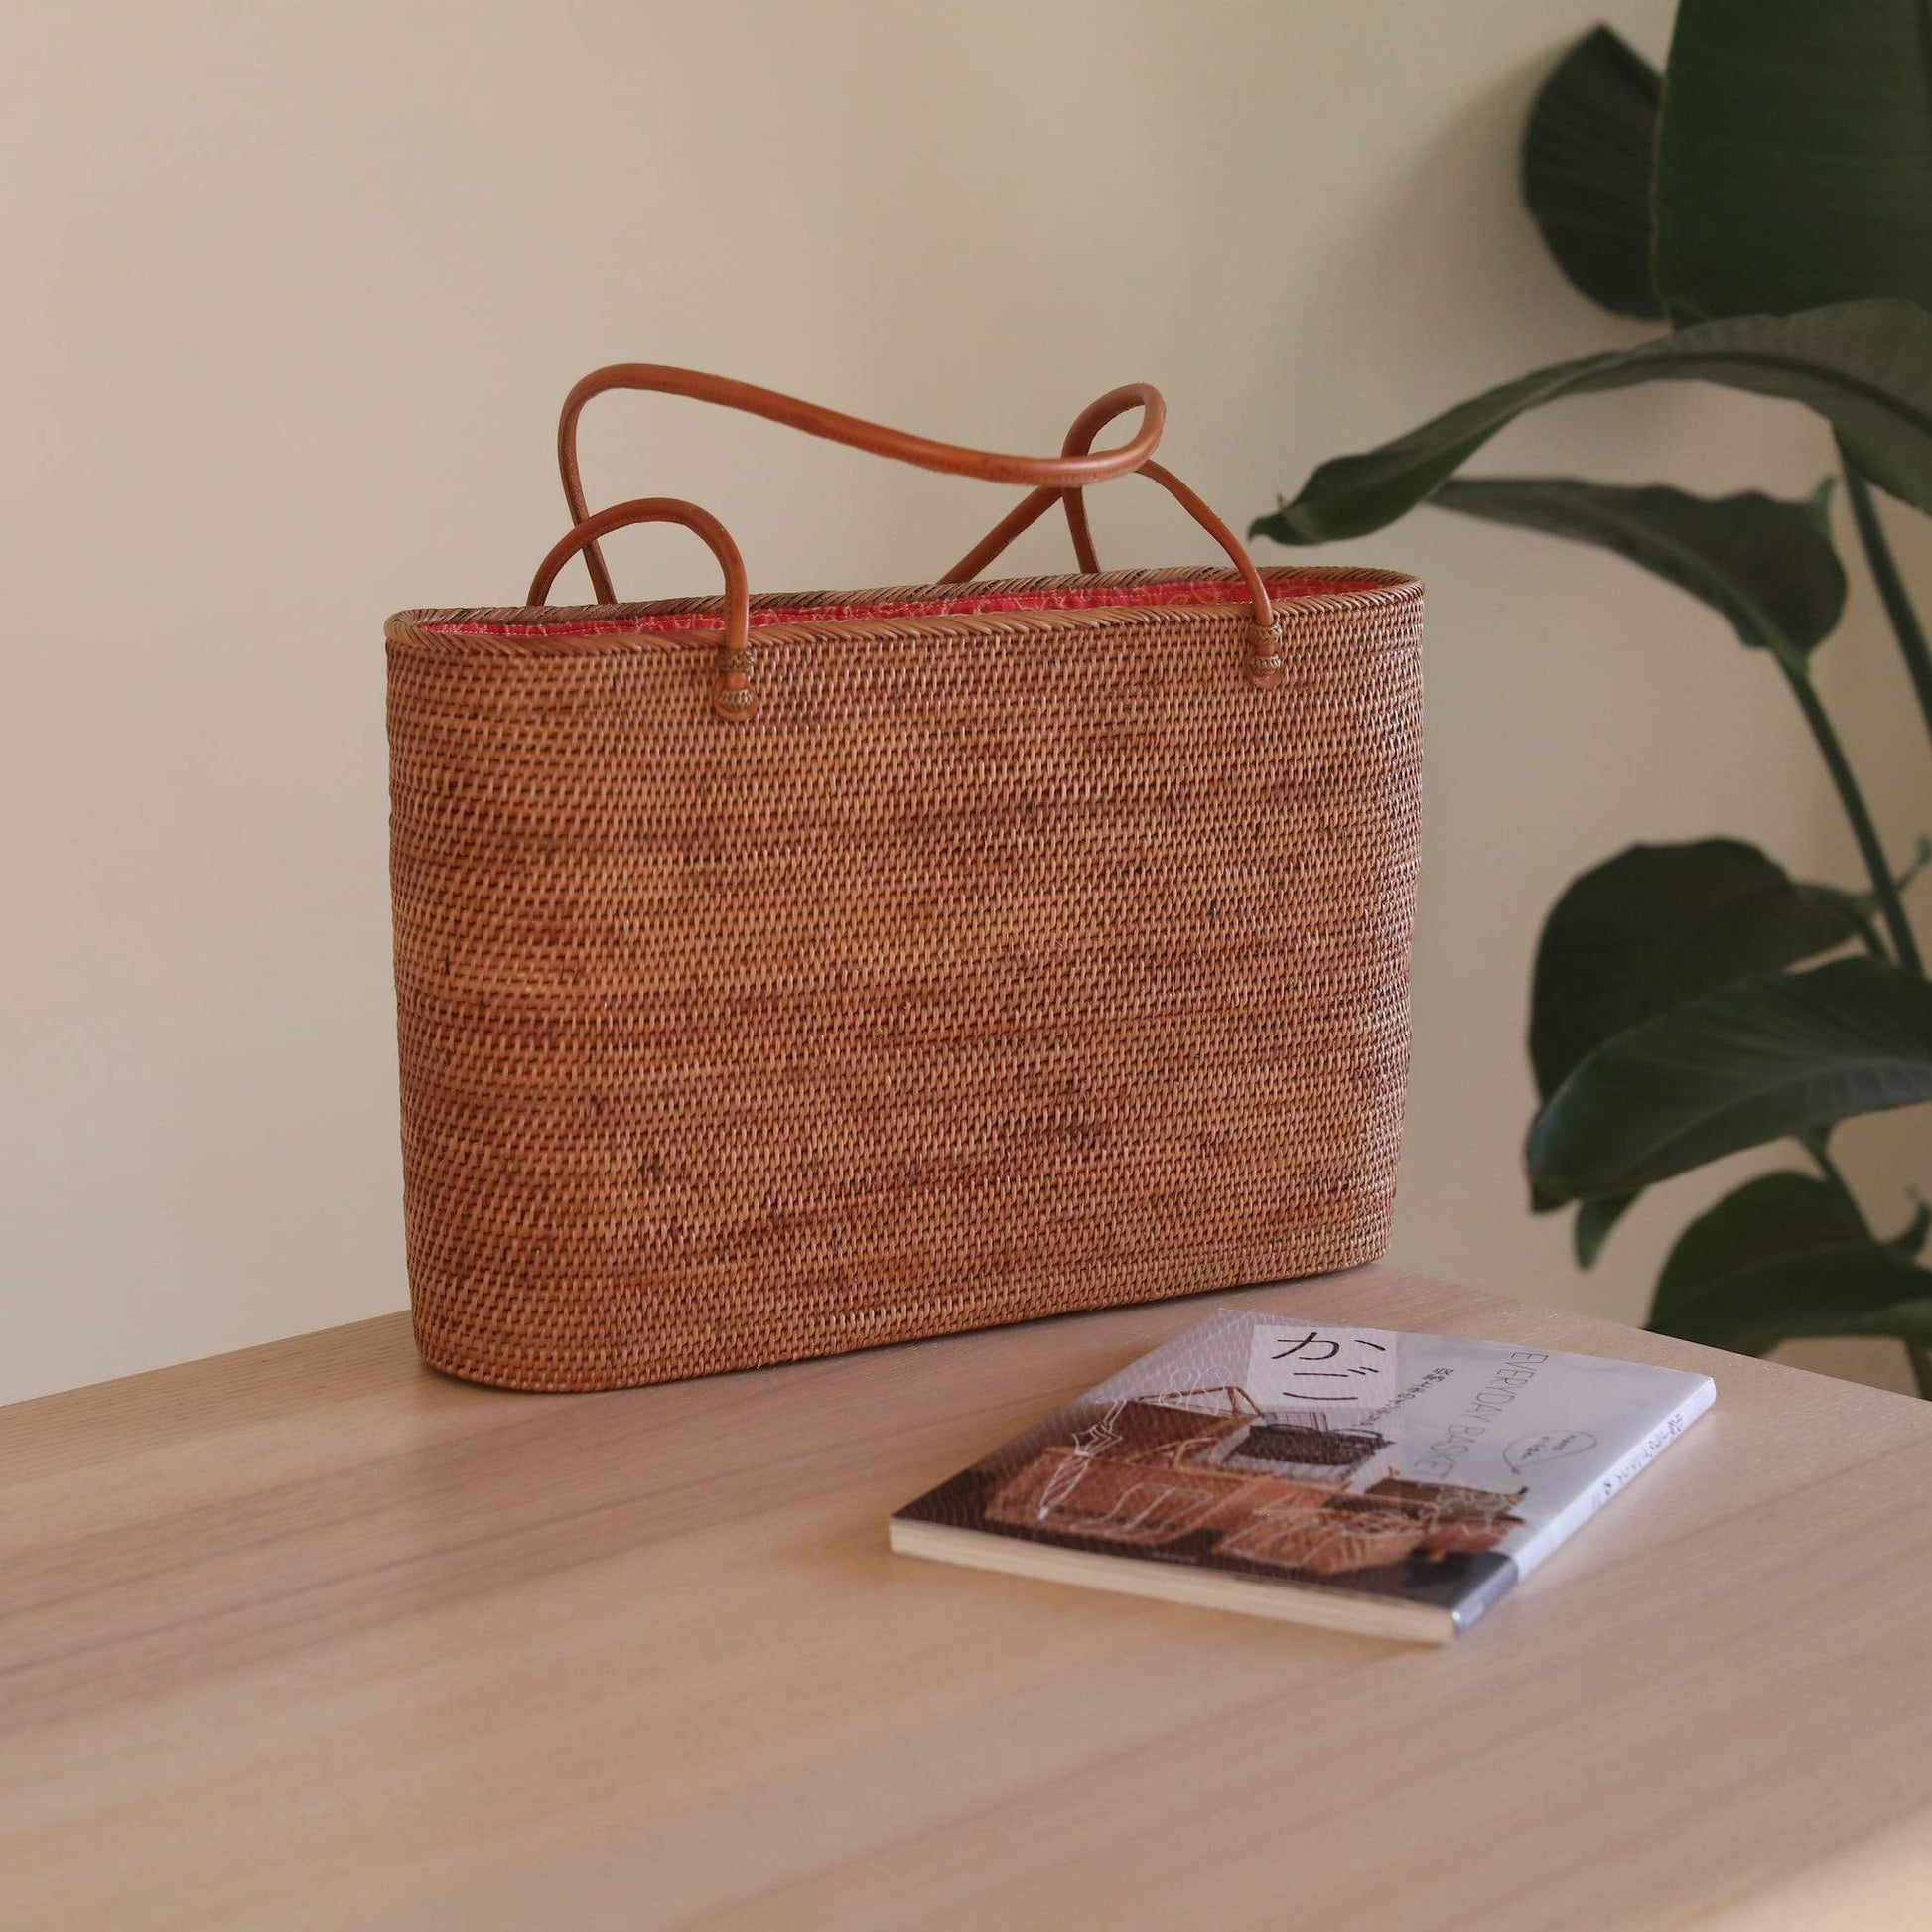 Bali Rattan Grand Shoulder Bag handmade by Ganapati Crafts Co. in Bali is sitting on a table looking stylish